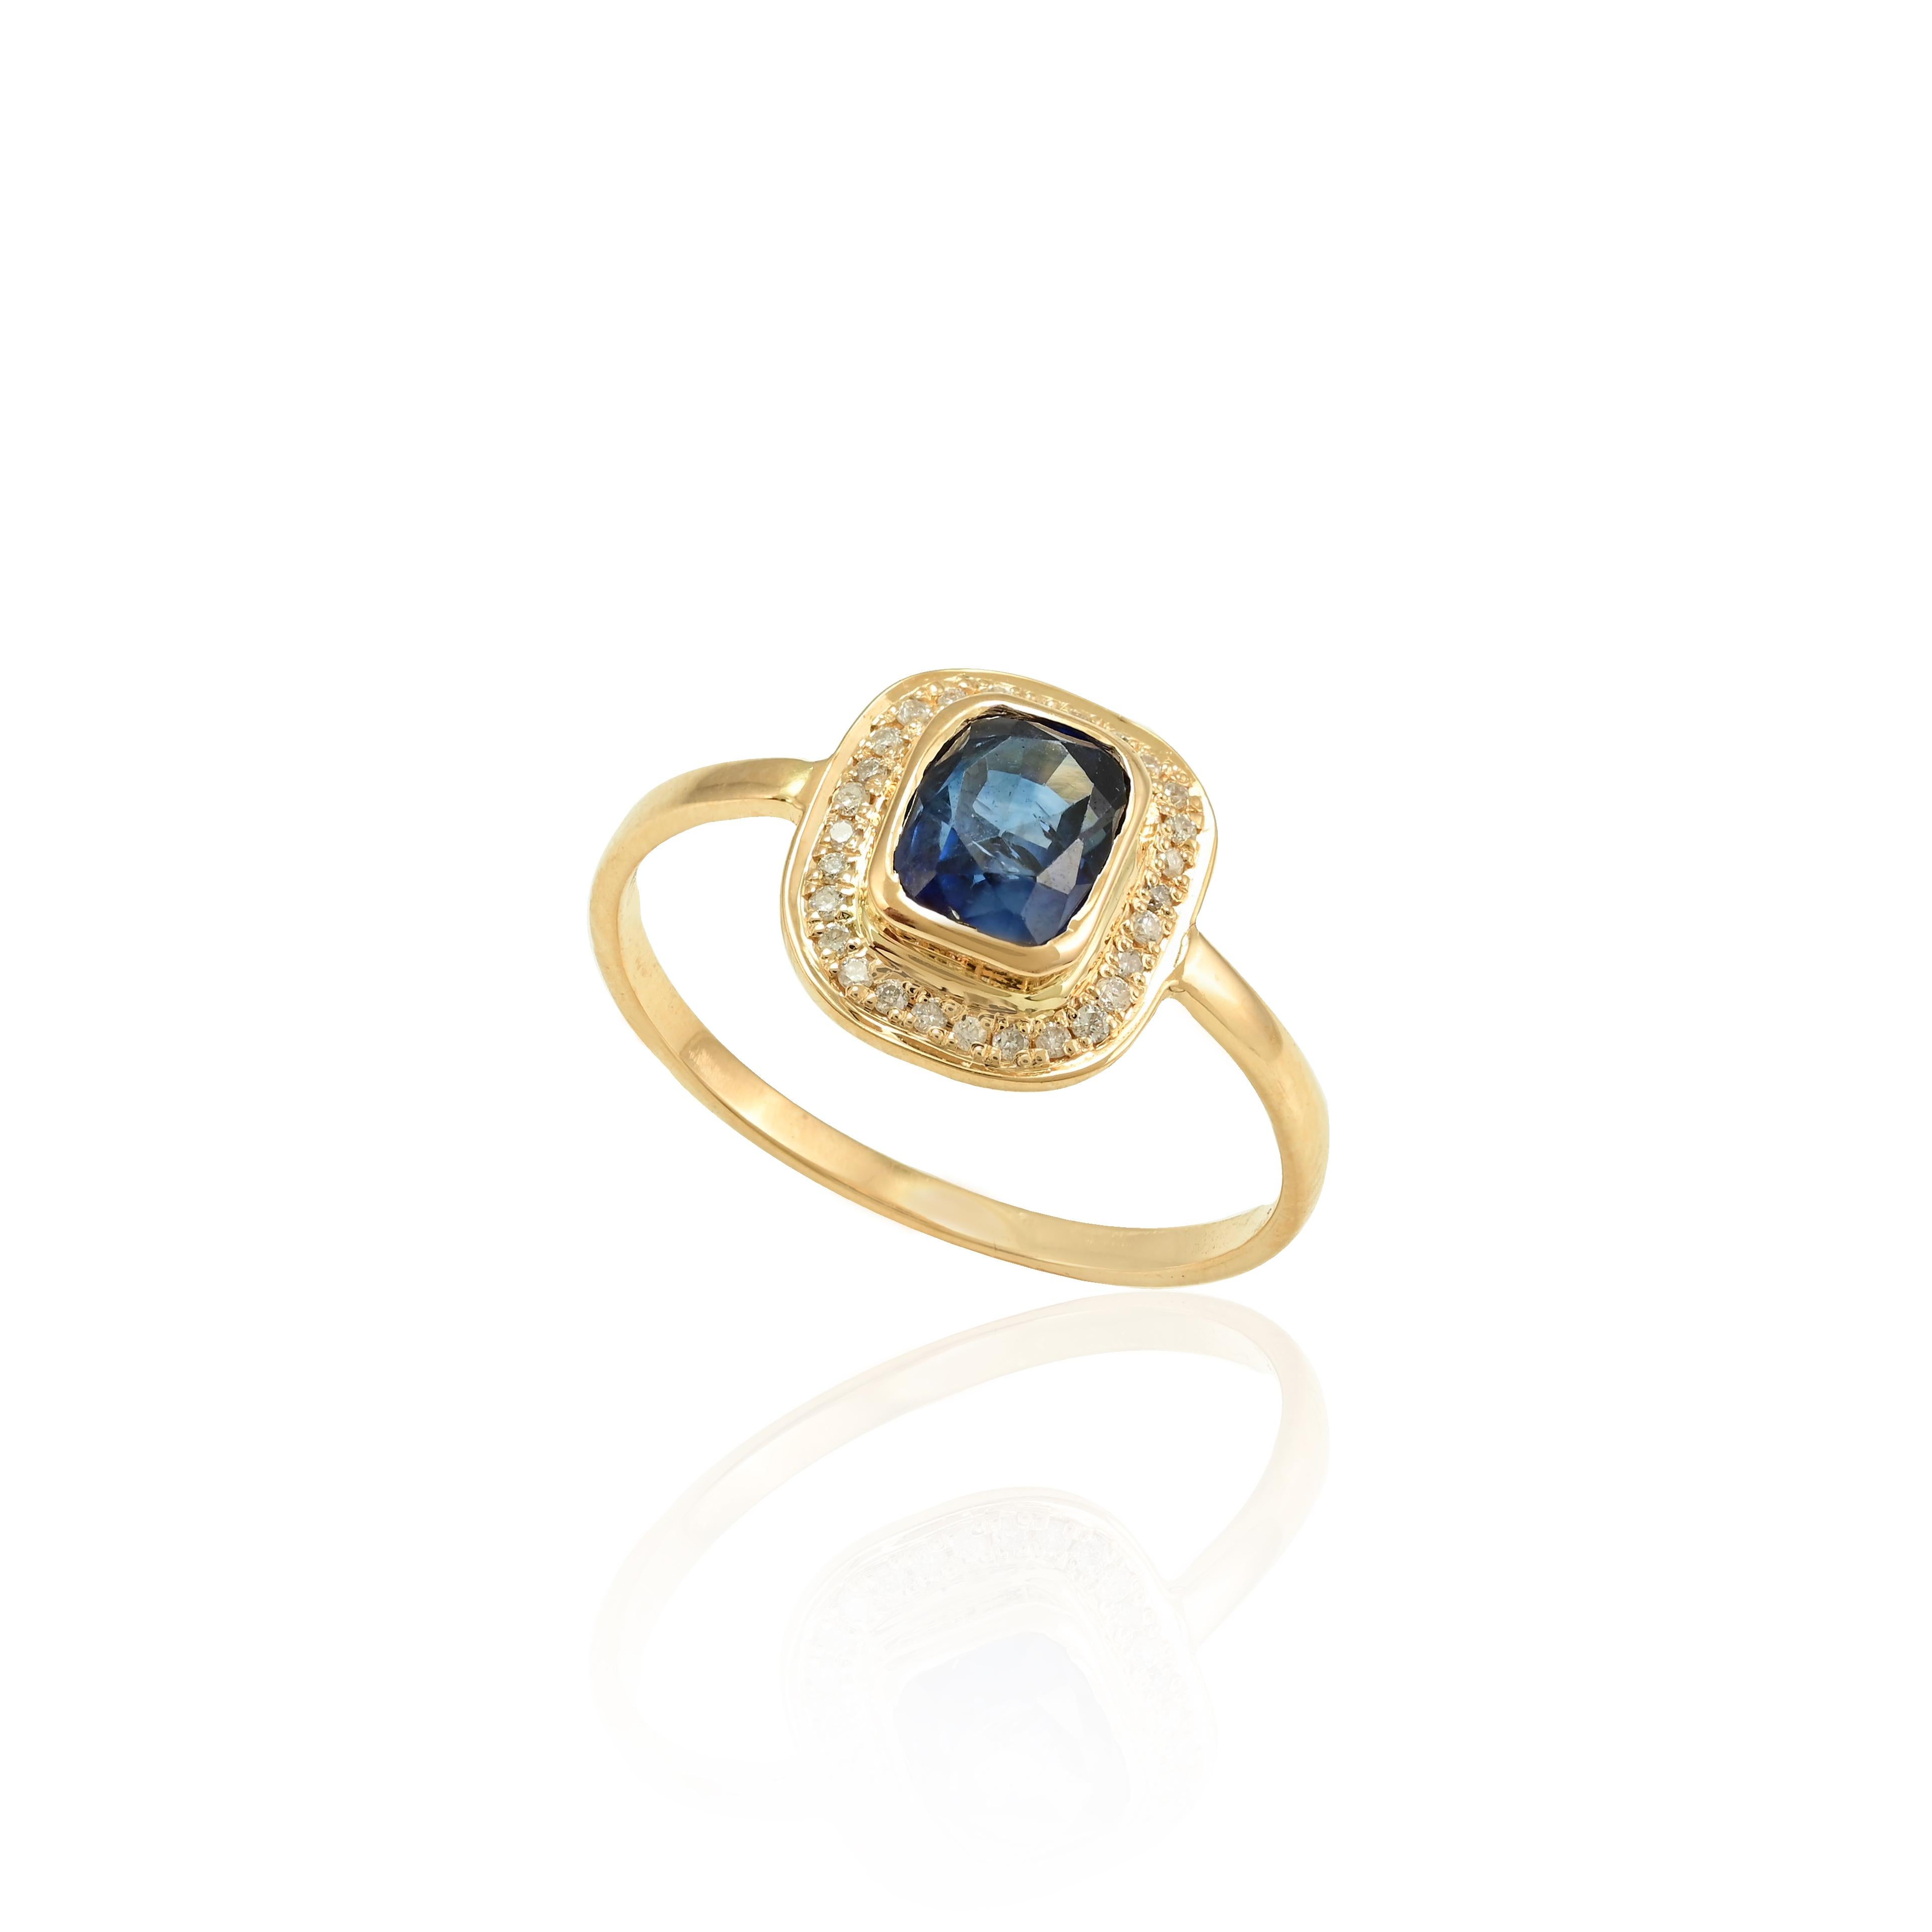 For Sale:  Vintage Deep Bright Blue Sapphire and Diamond Halo Ring 18k Solid Yellow Gold 6